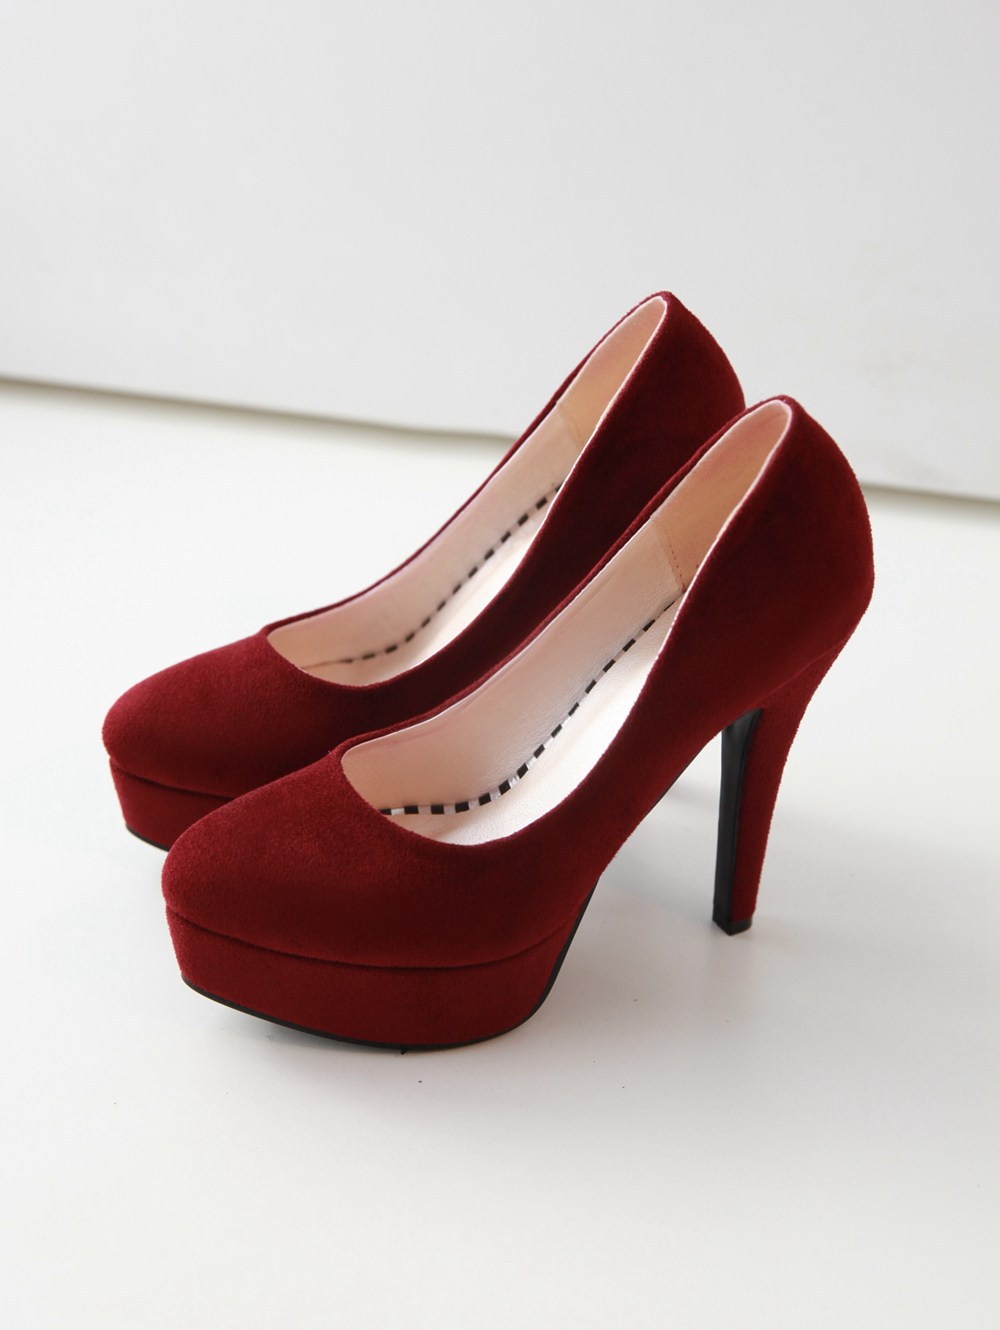 louboutin roller spikes - red bottom heels on sale